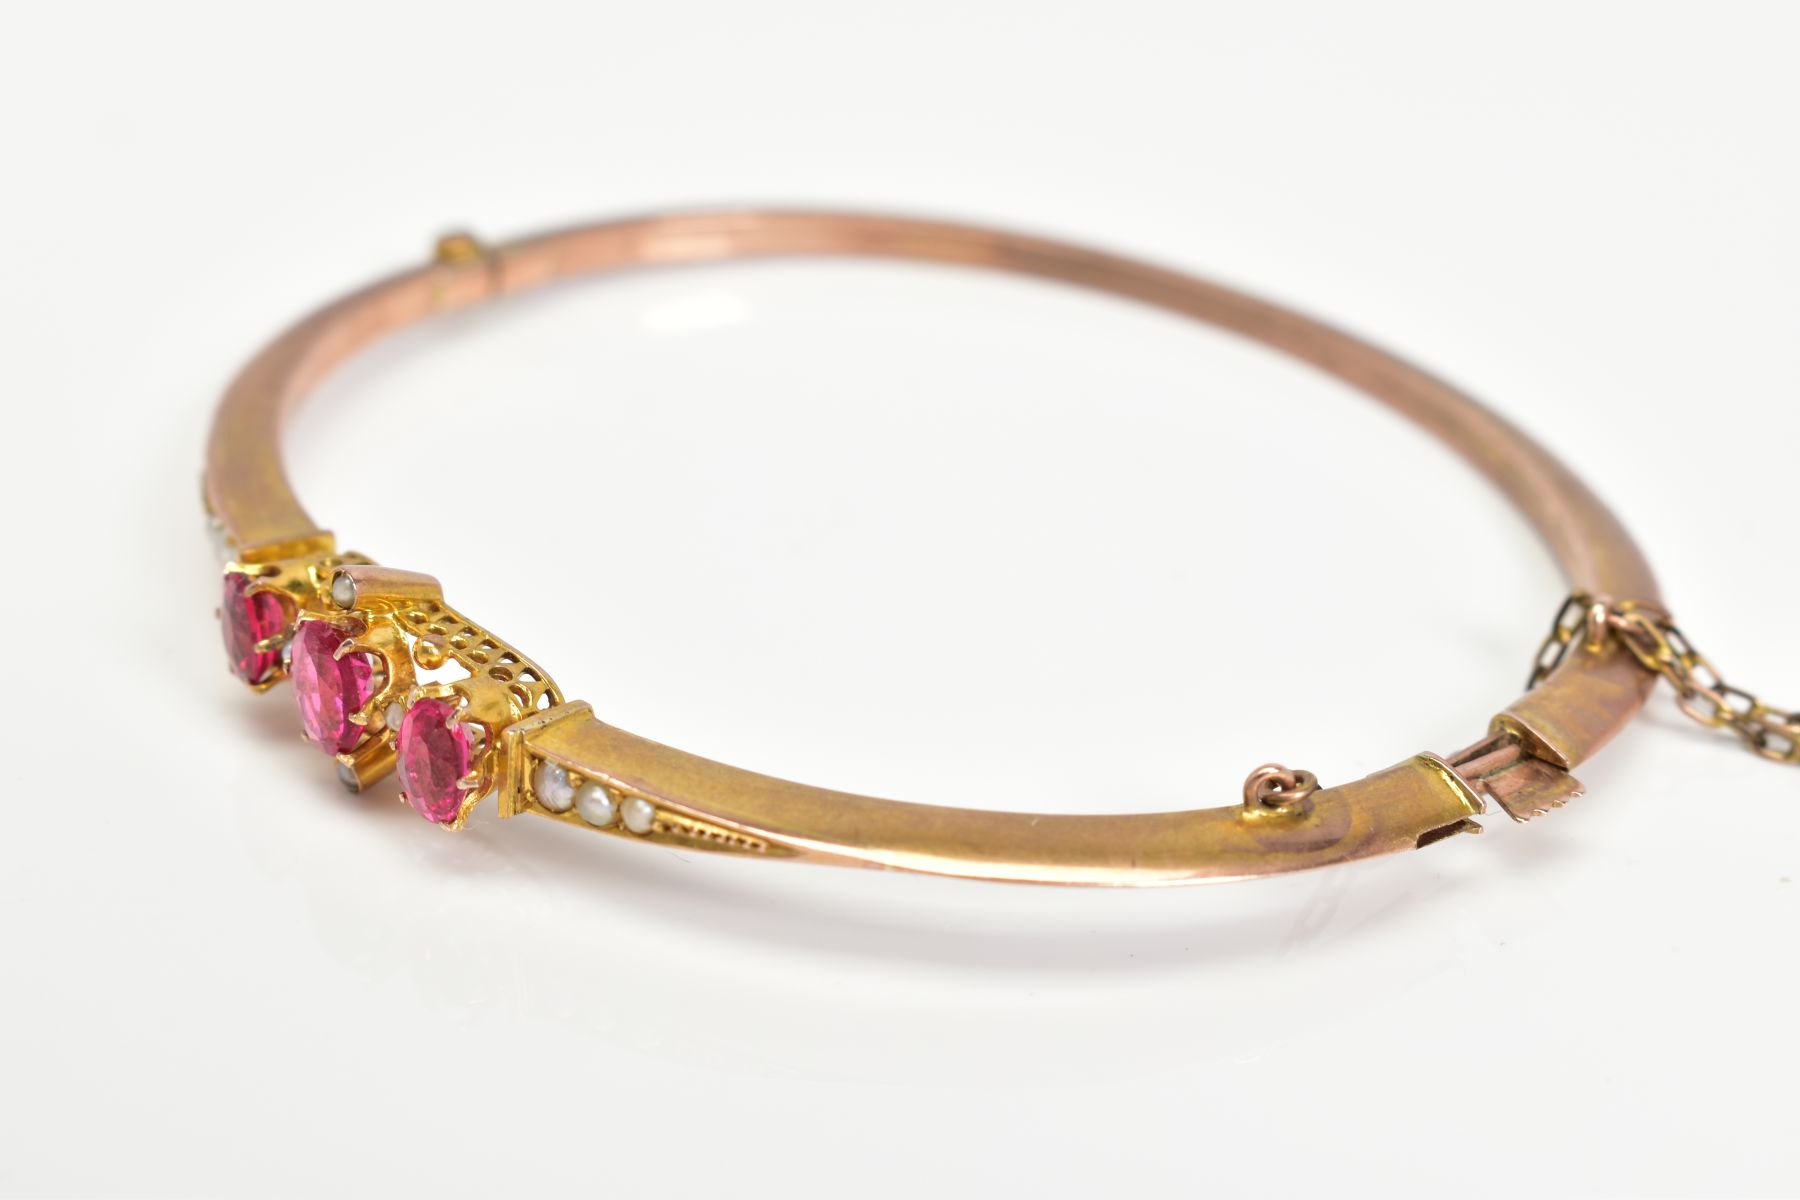 AN EARLY 20TH CENTURY GOLD SPLIT PEARL AND GARNET TOPPED DOUBLET FANCY BANGLE, measuring - Image 2 of 4